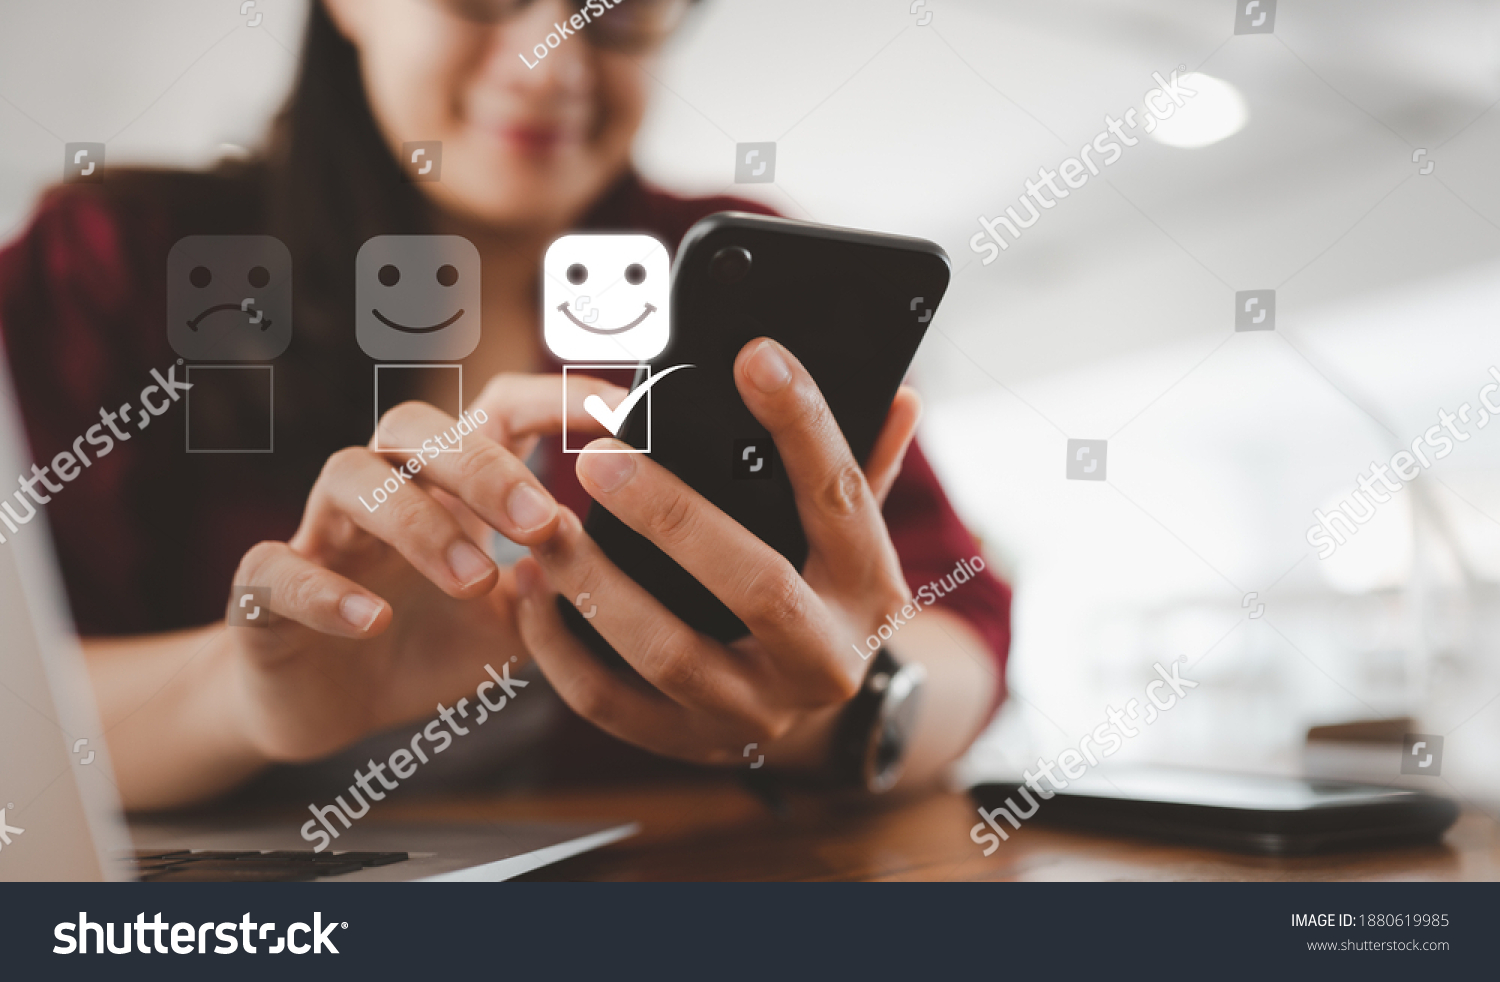 Customer service evaluation concept. smiling Asian female Is using a smartphone And she is pressing face emoticon smiling in satisfaction on virtual touch screen. #1880619985